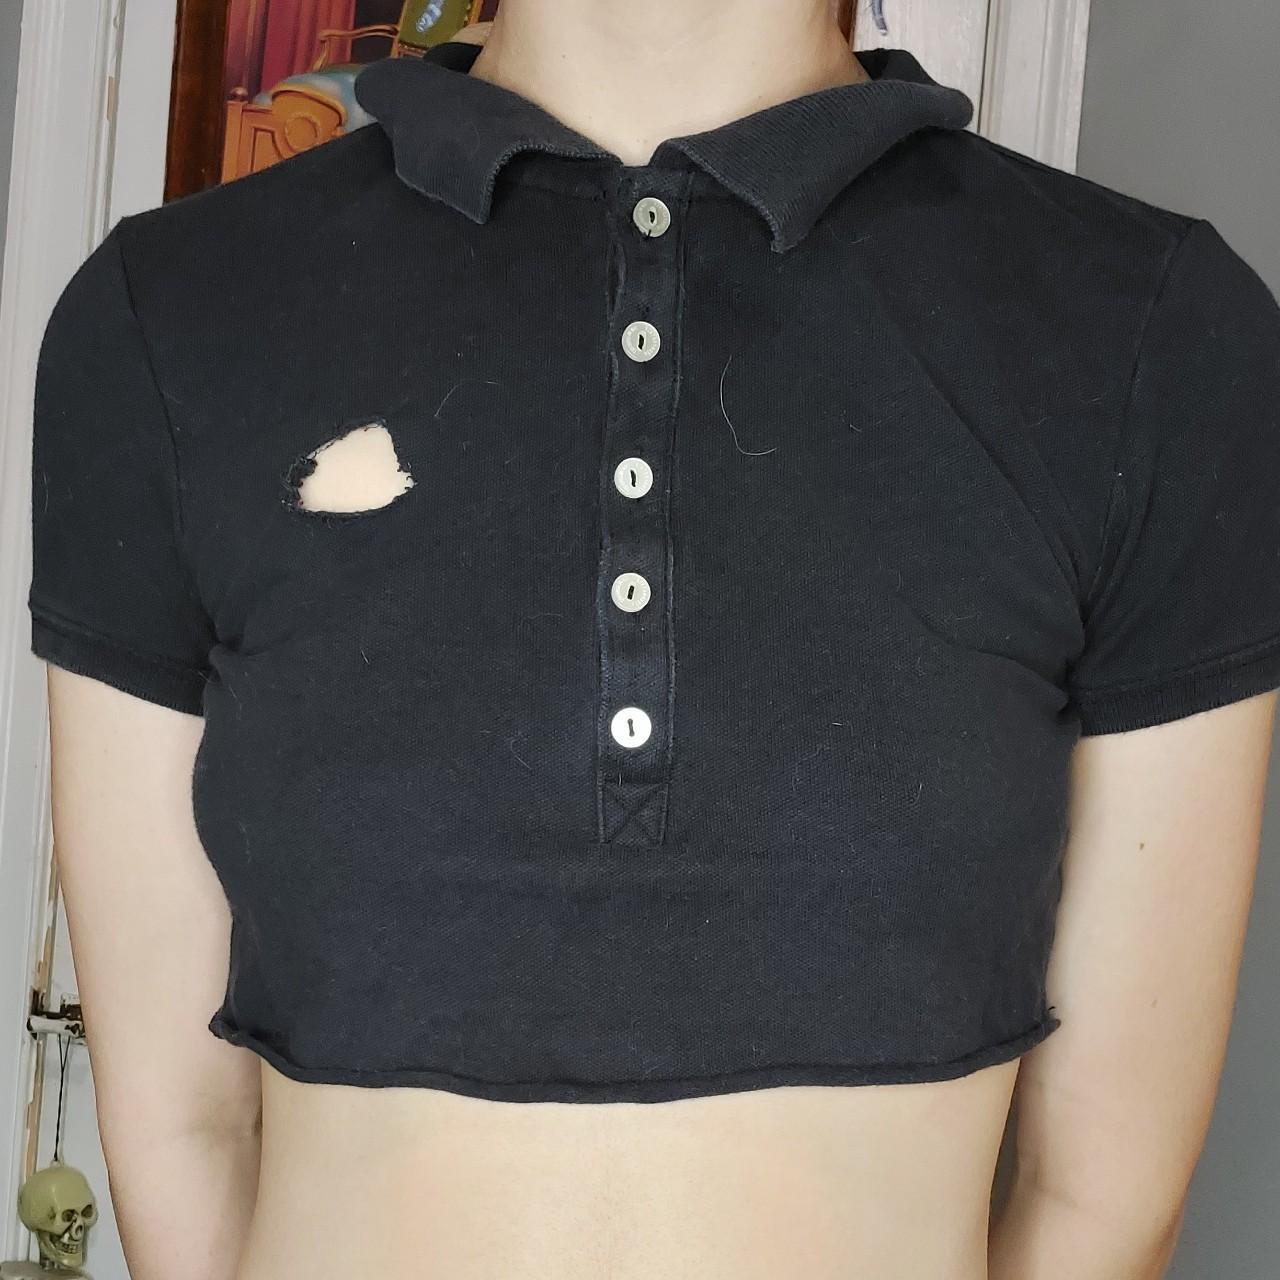 Product Image 2 - 👕 Old Aeropostale collared button